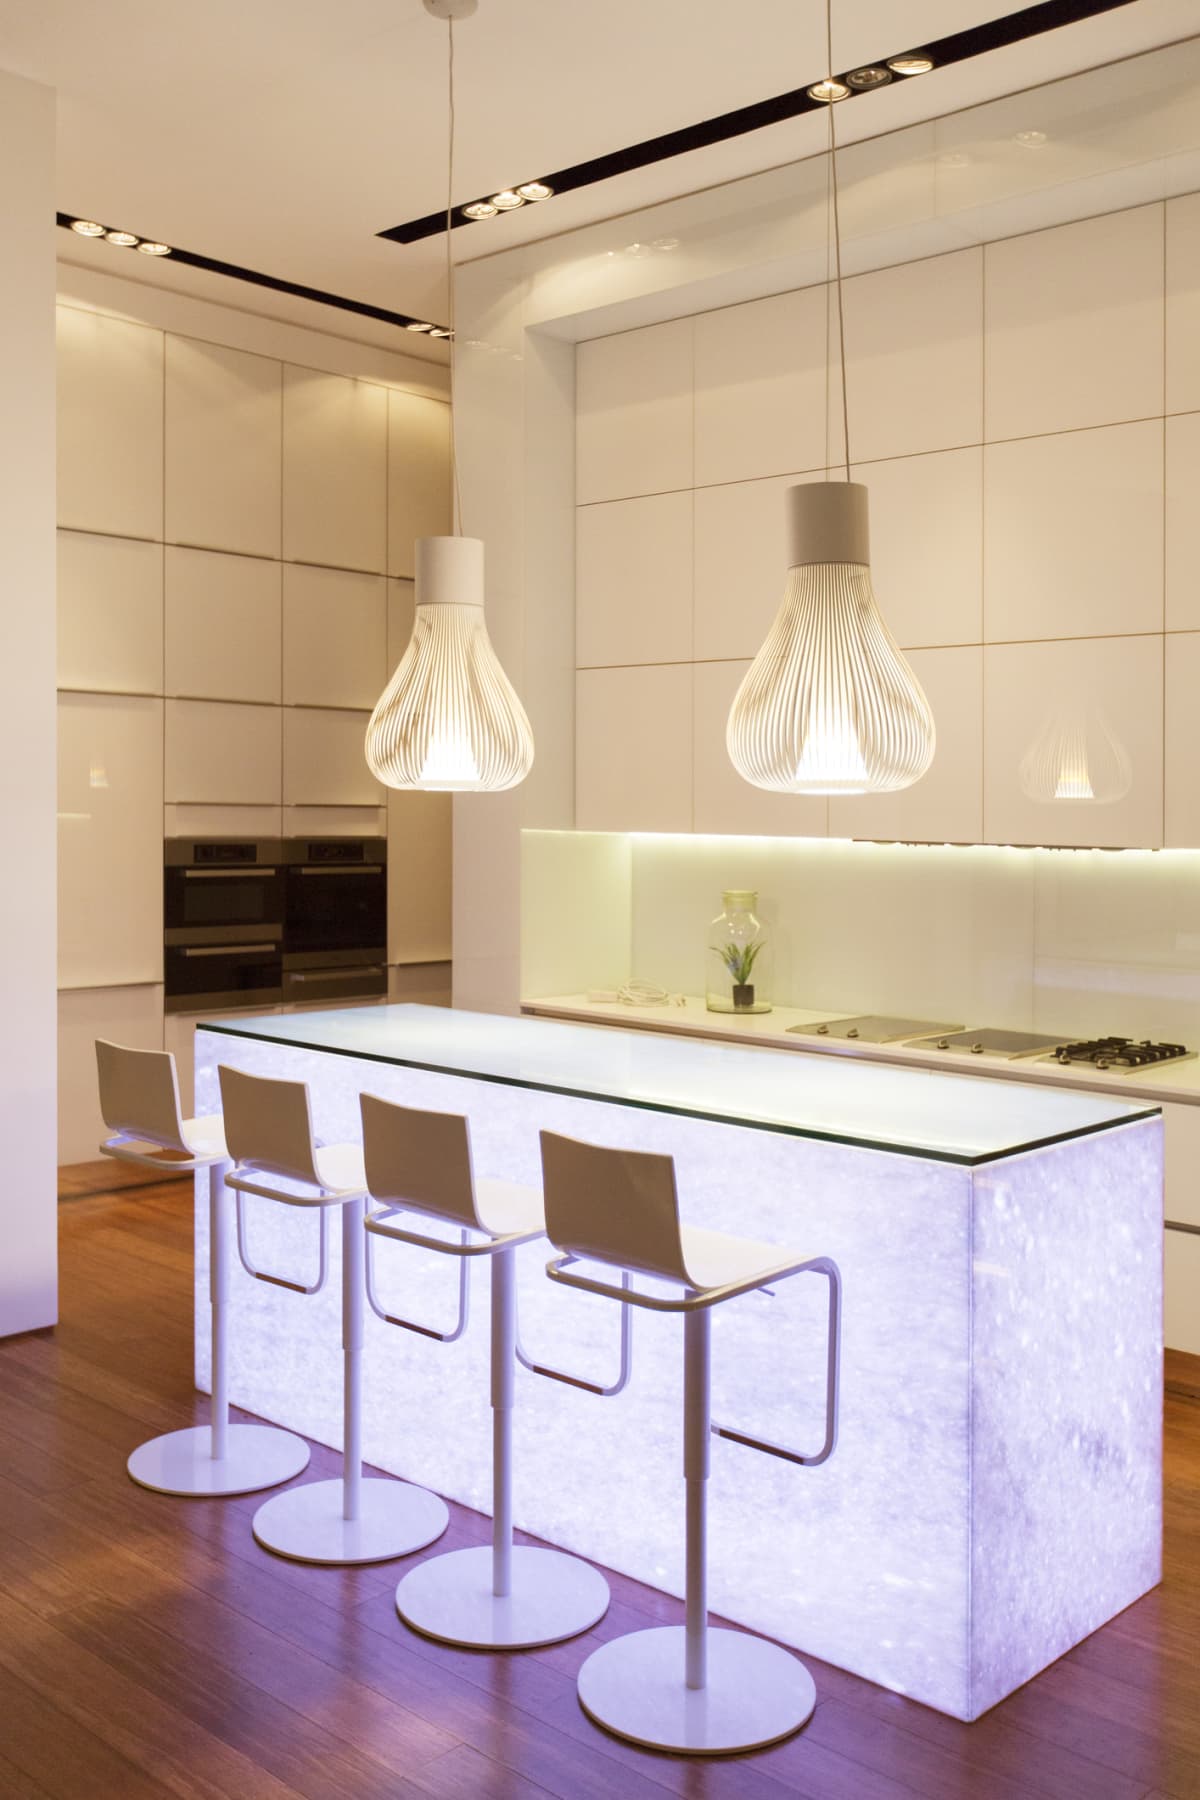 A glowing island in a bright kitchen